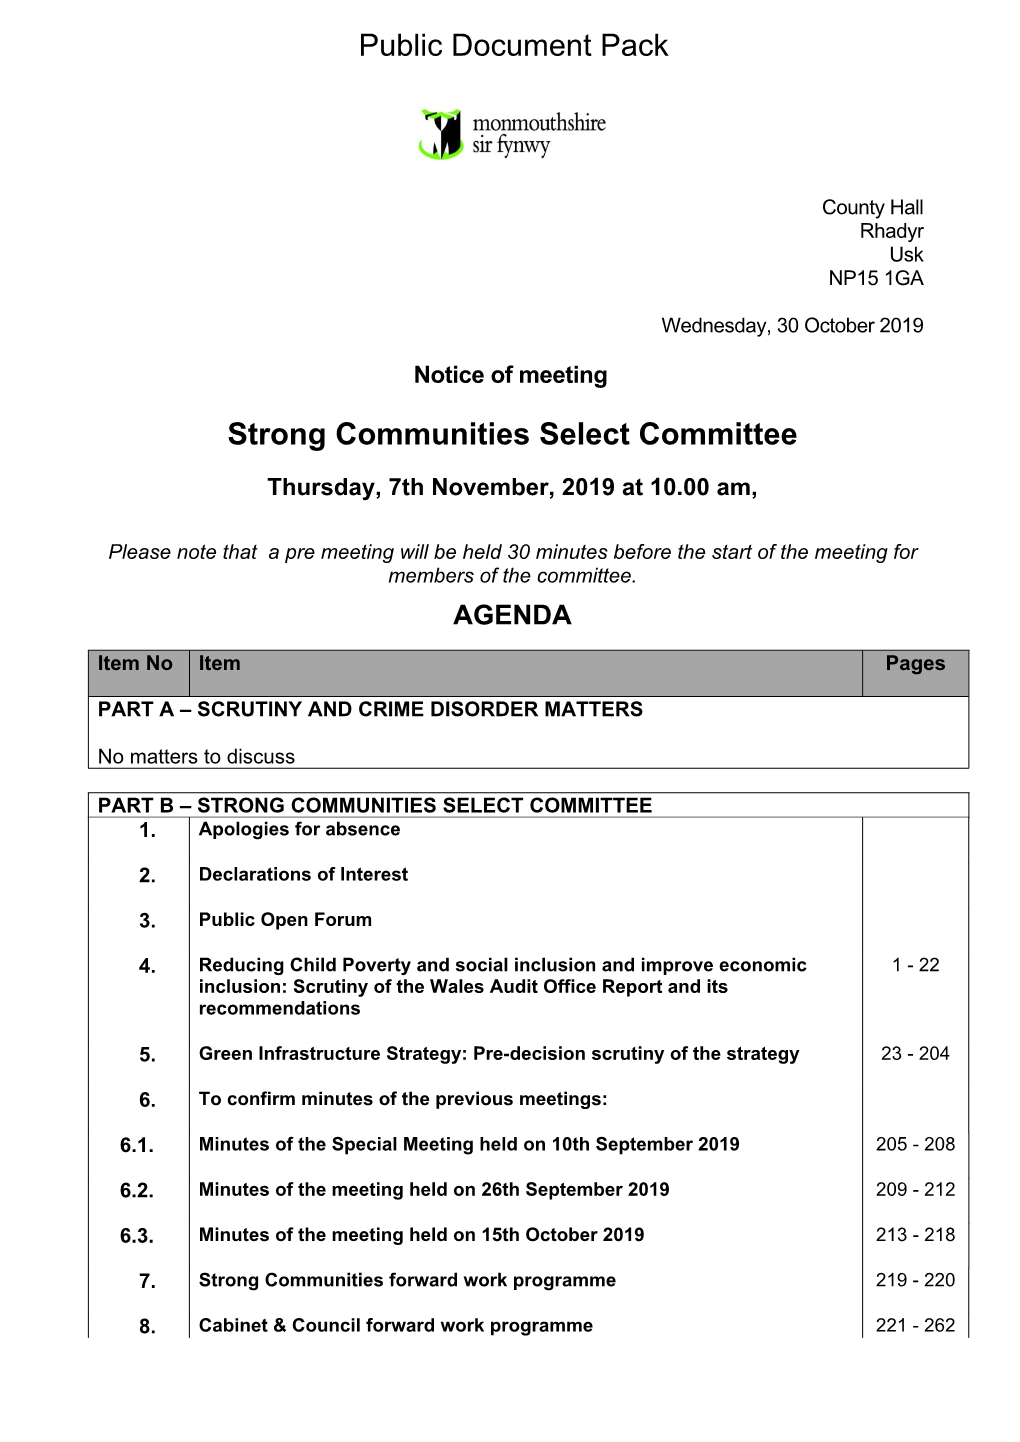 (Public Pack)Agenda Document for Strong Communities Select